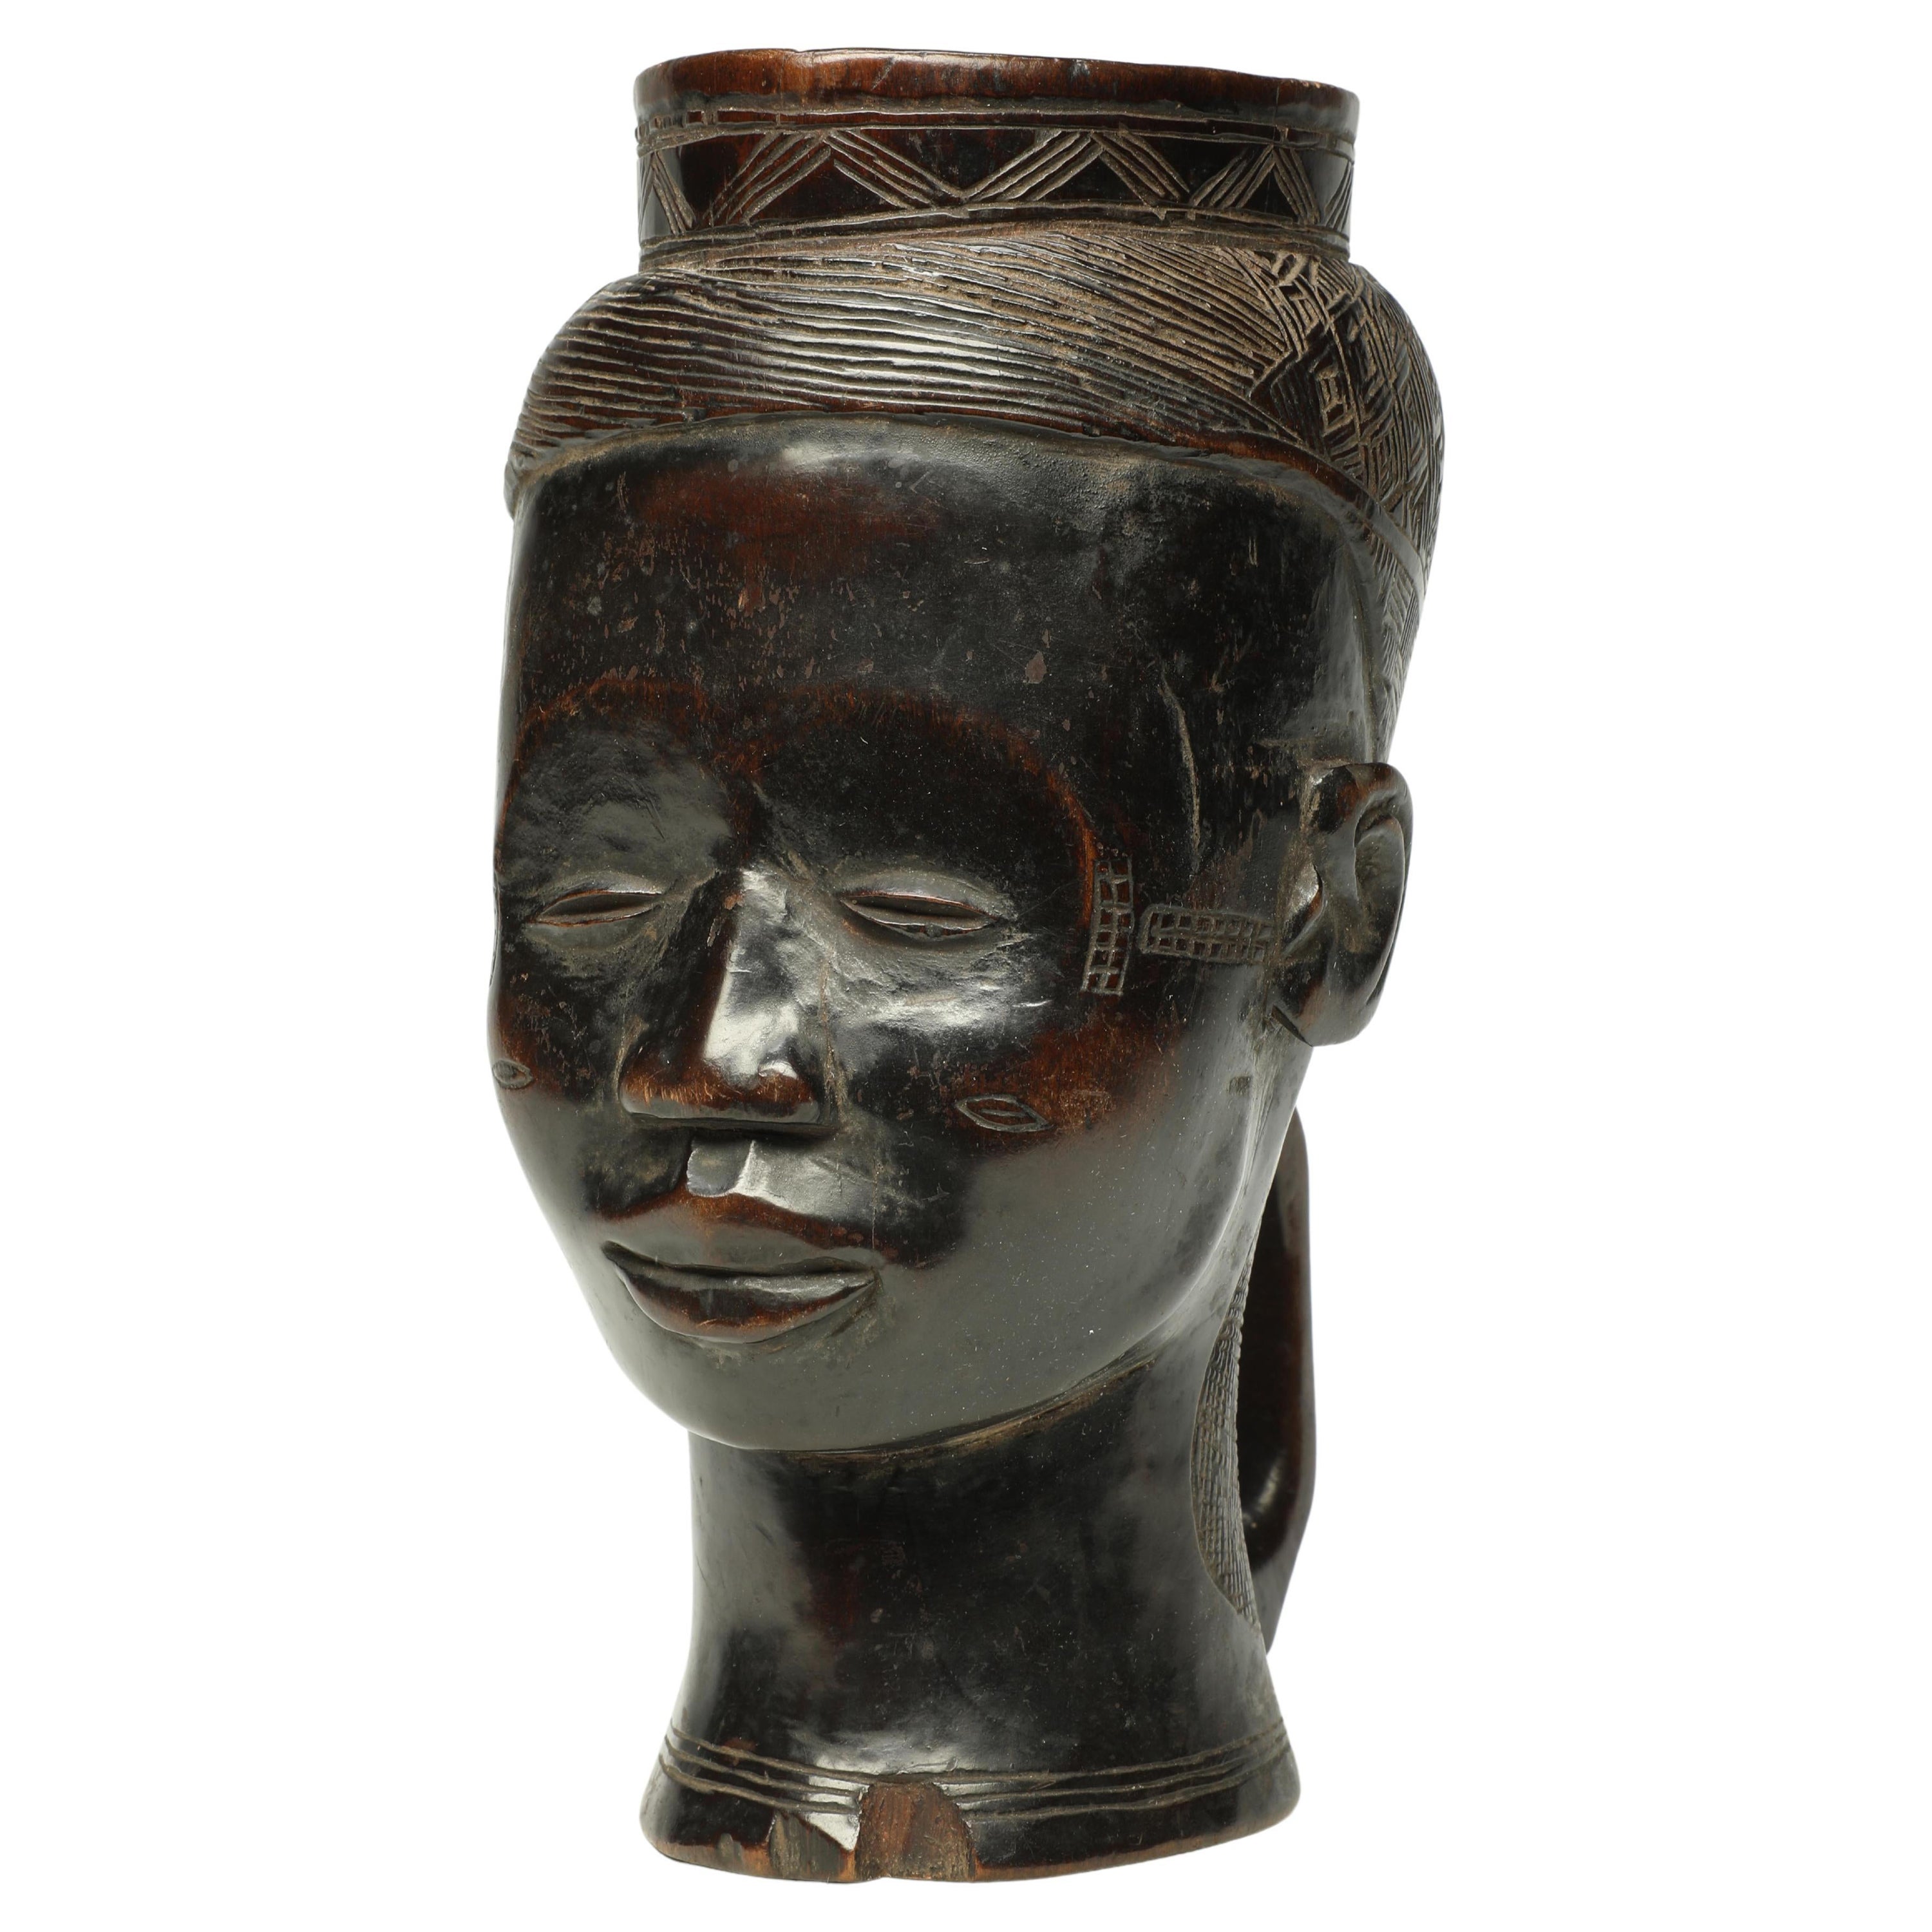 Very Early Used Carved Wood Kuba Figural Cup, Congo, Africa Sweet Face